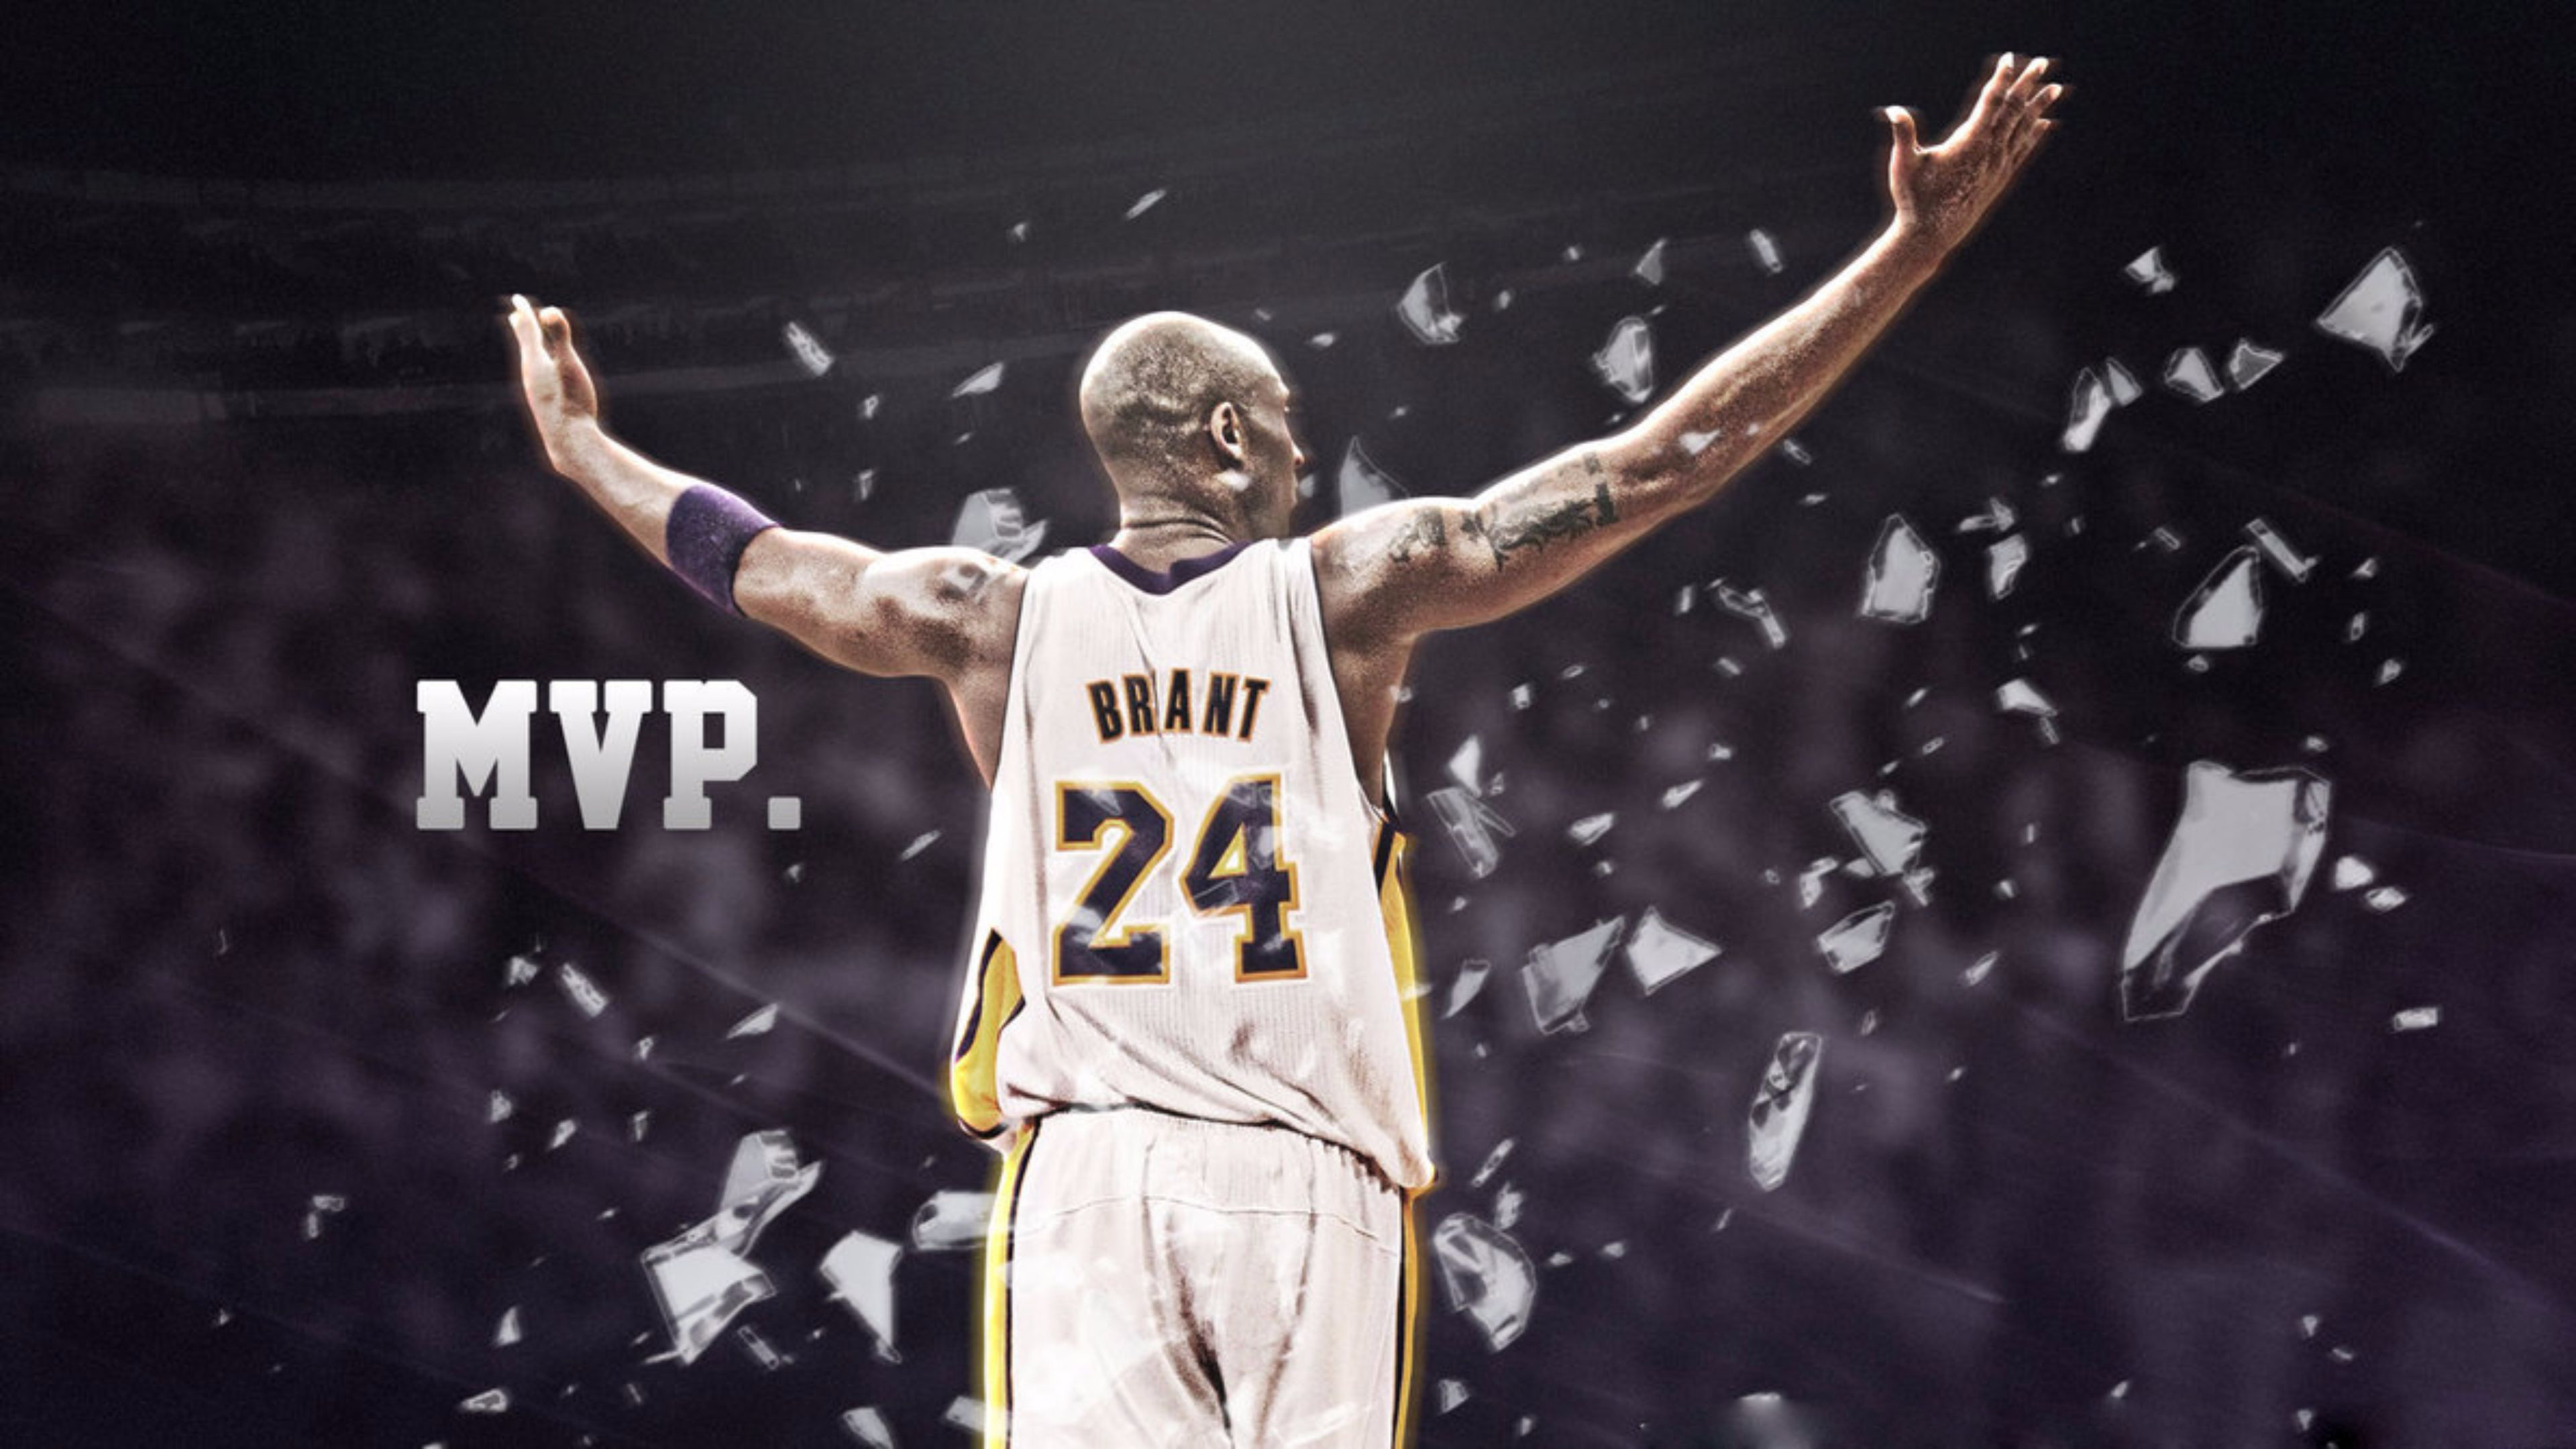 3840x2160 Kobe Bryant Wallpapers High Resolution and Quality DownloadKobe Bryant